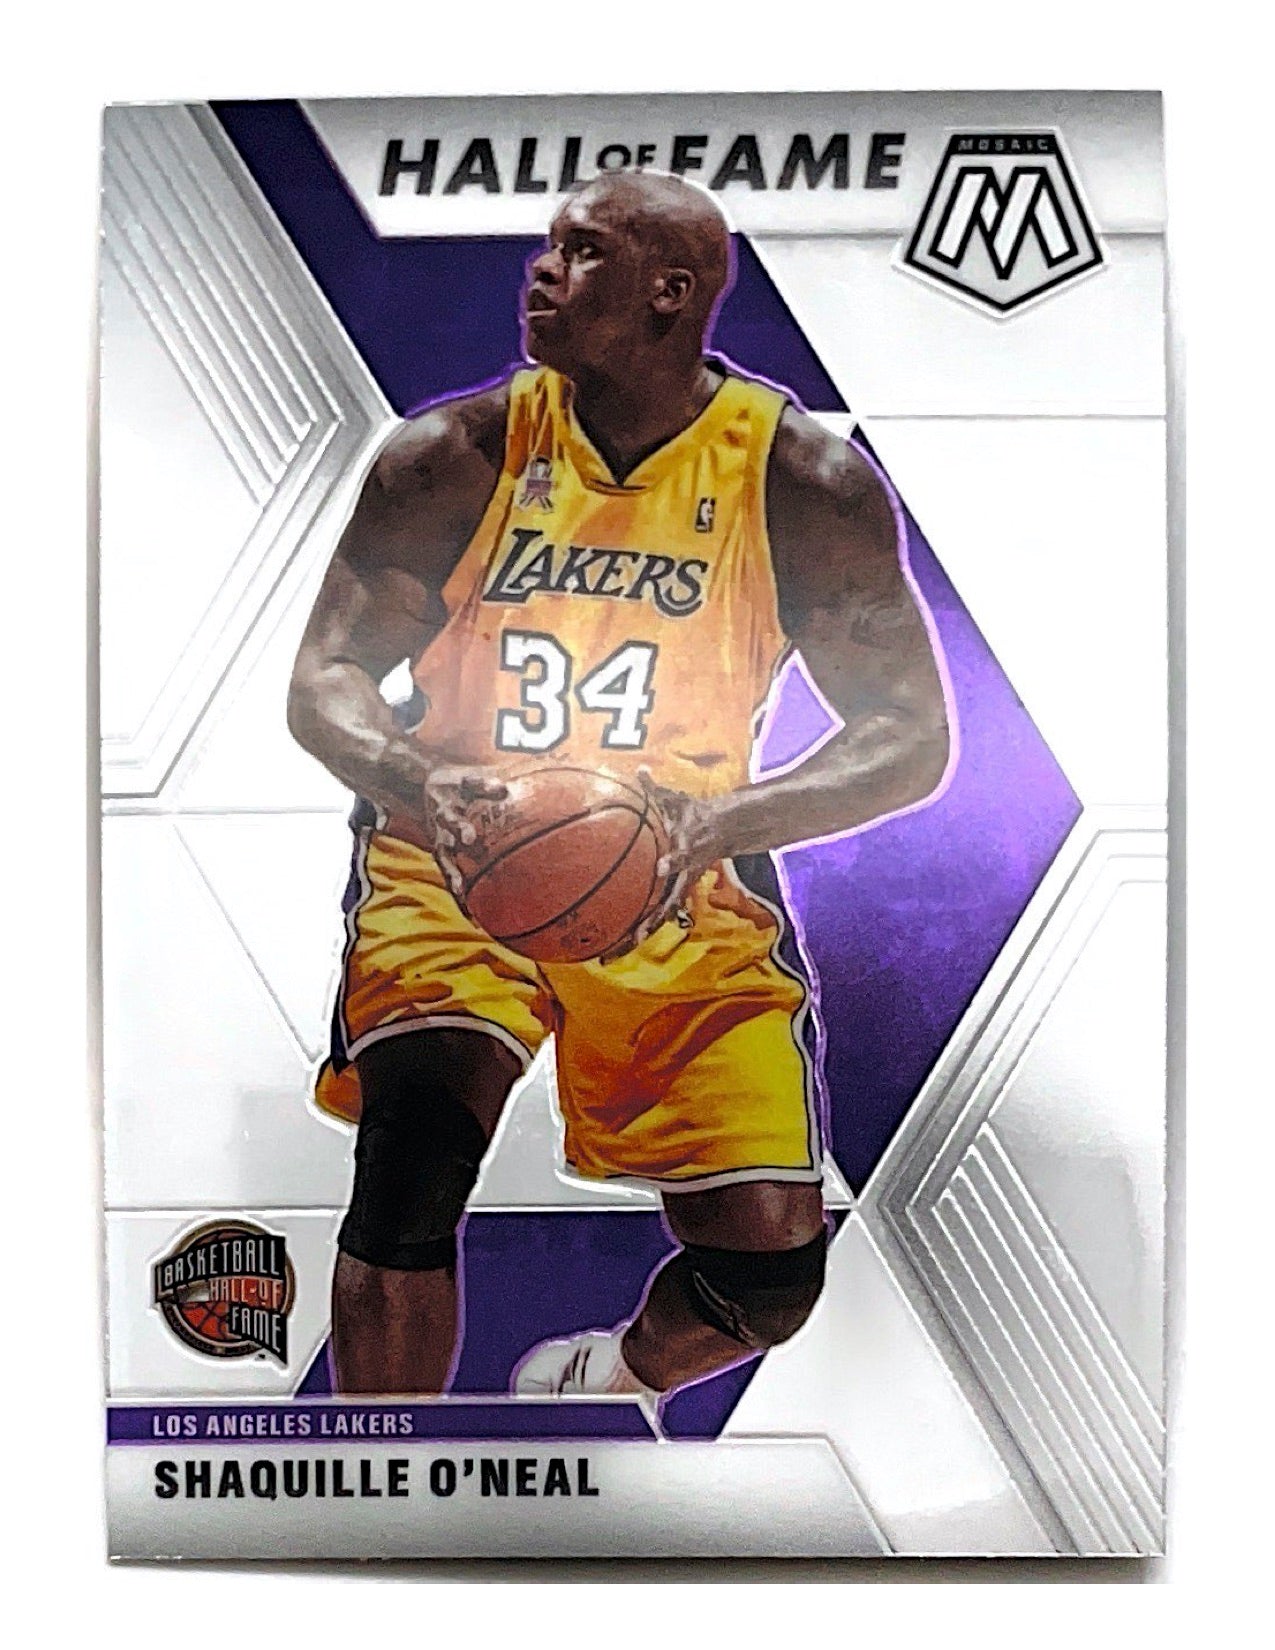 Shaquille O'Neal 2019-20 Panini Mosaic Hall of Fame #281